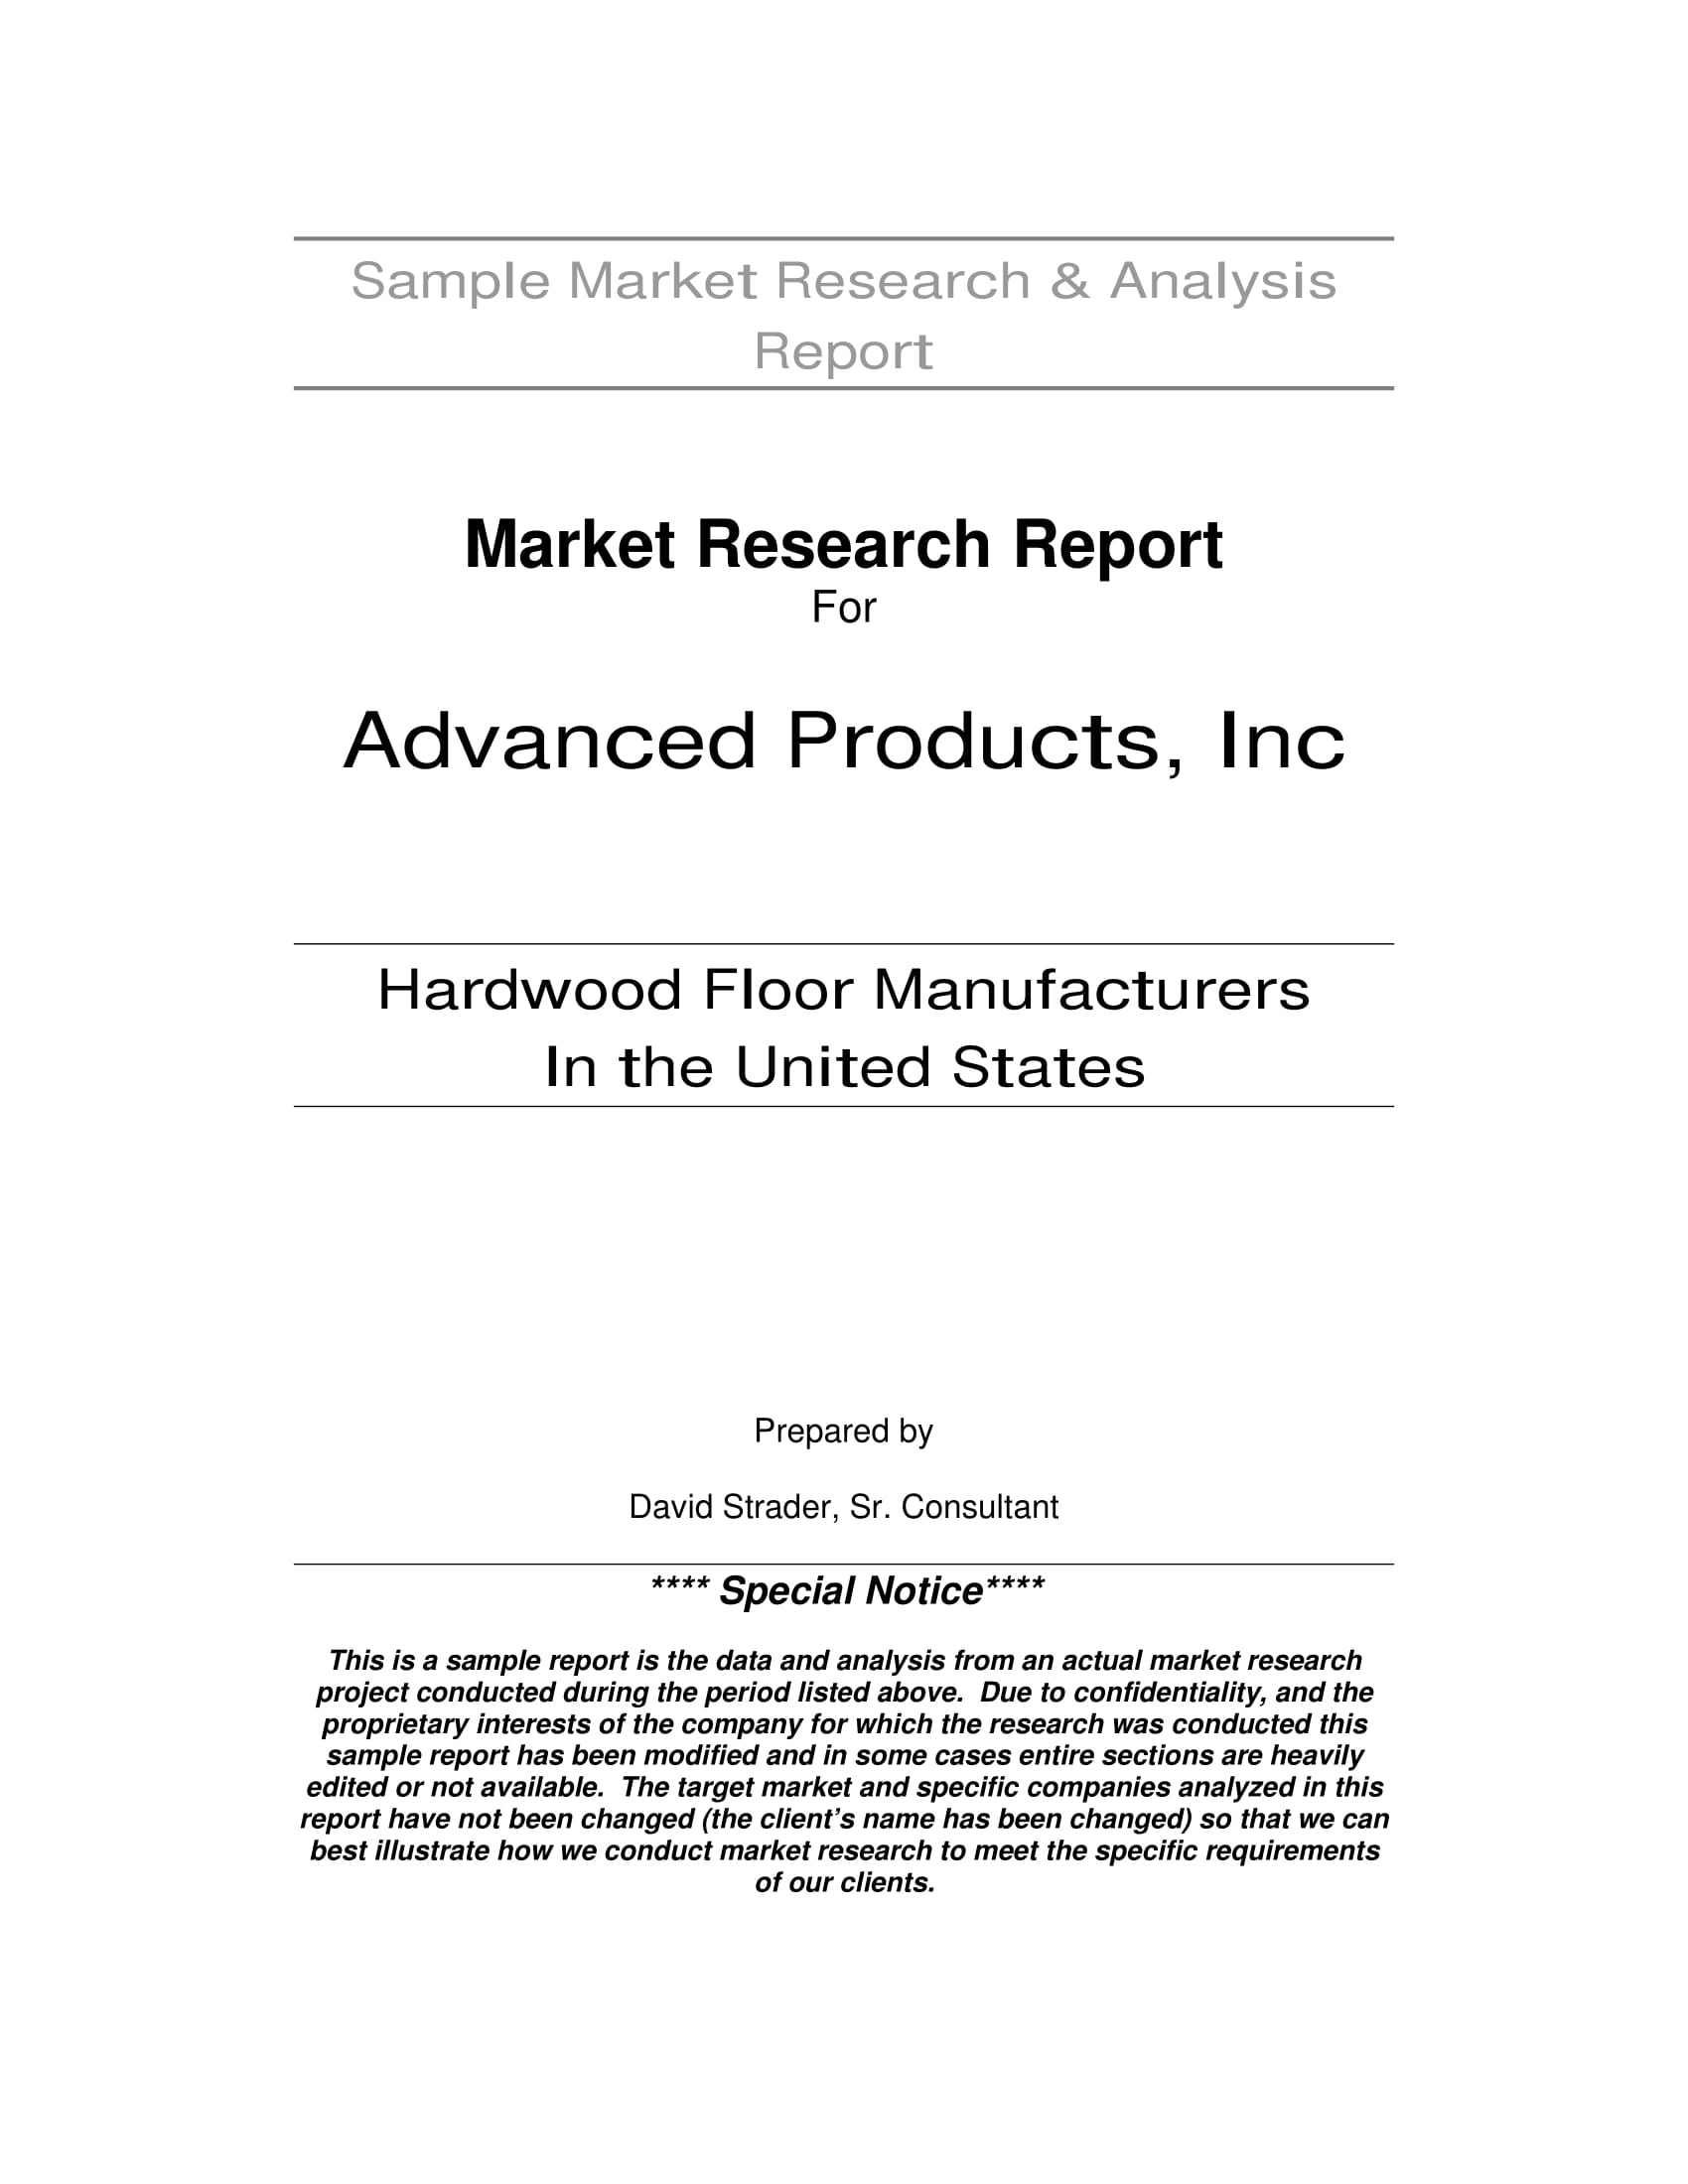 business plan market research report for advanced product example 01